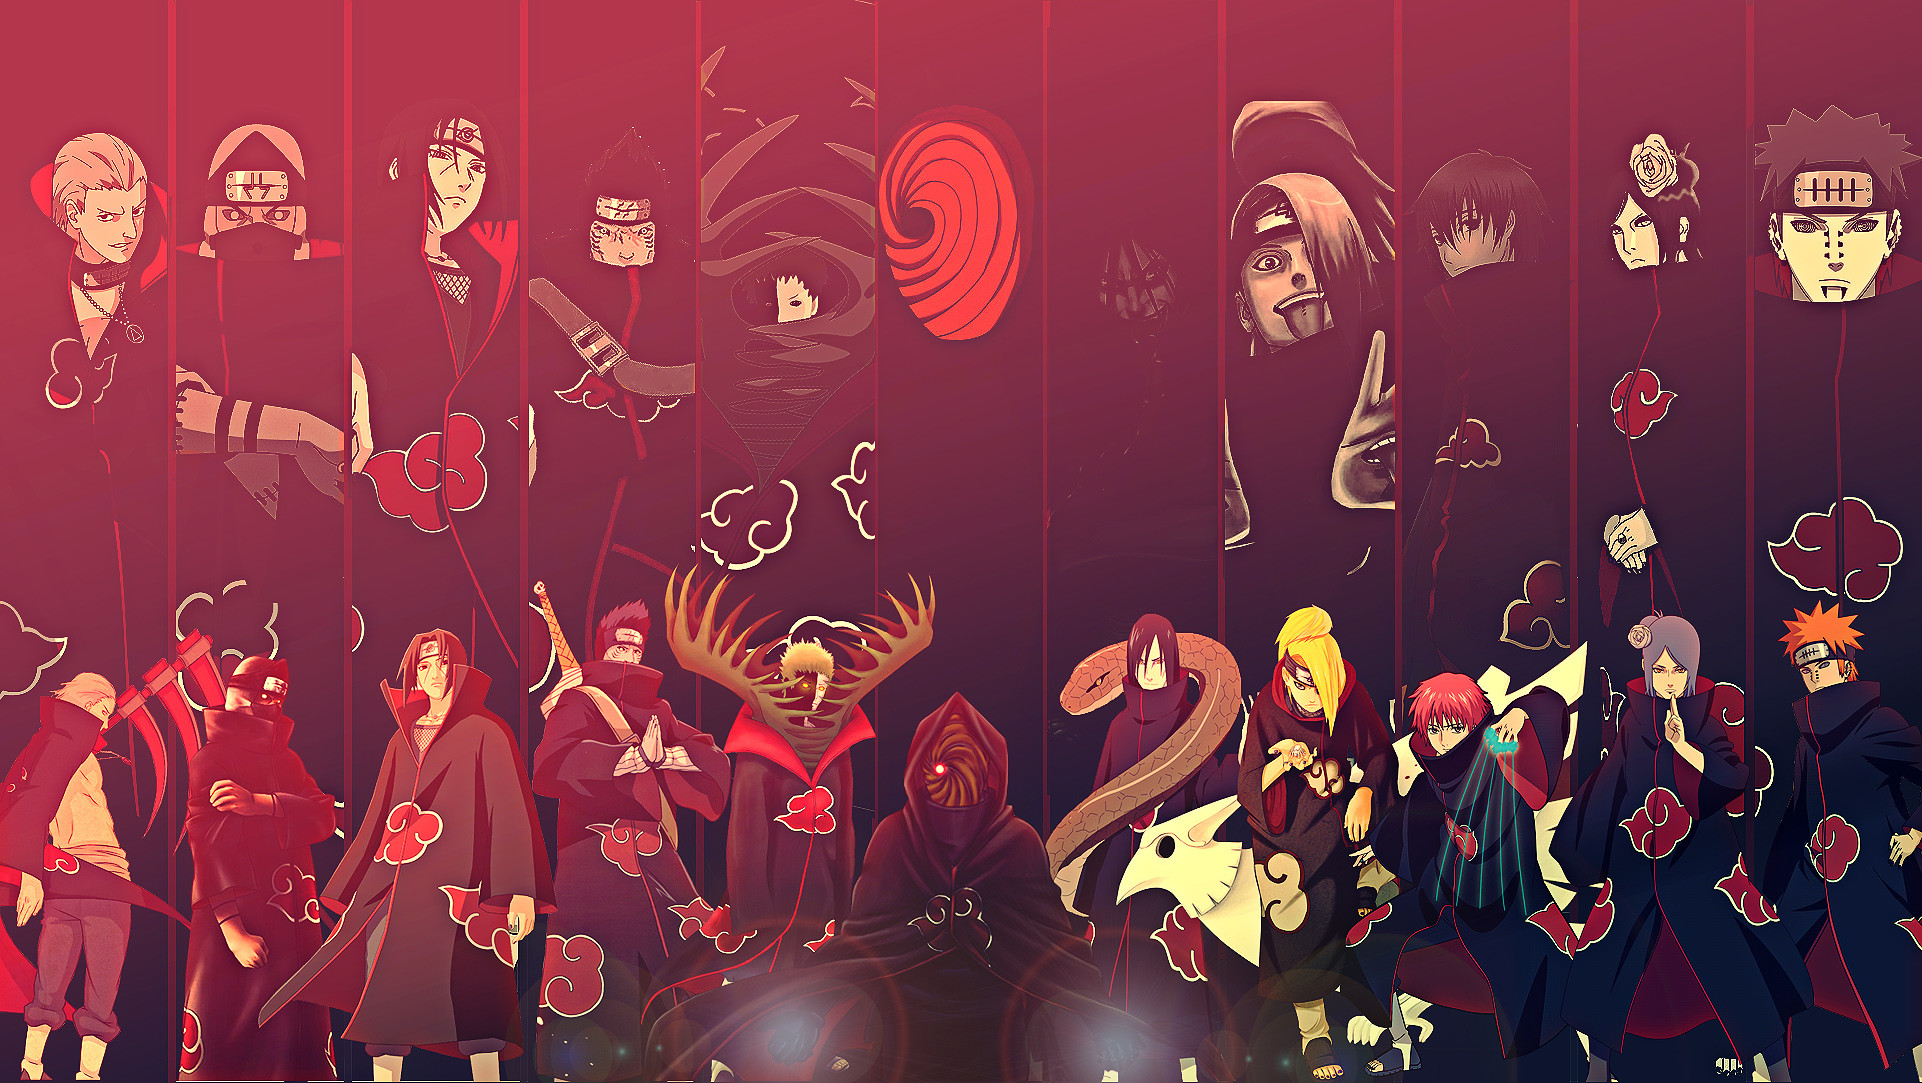 1922x1083 View, download, comment, and rate this  Akatsuki Members Wallpaper  - Wallpaper Abyss